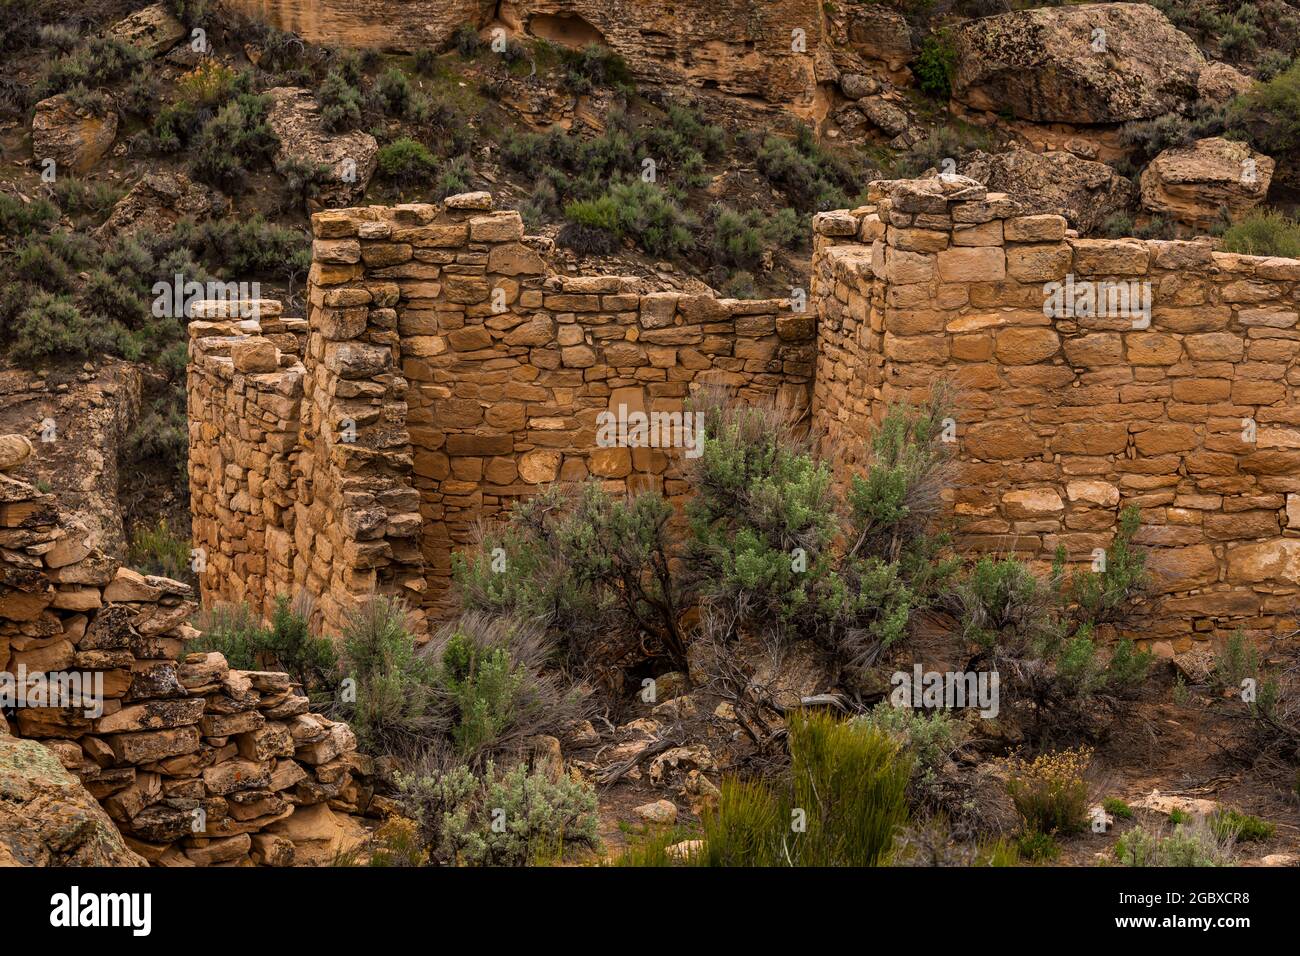 Exquisitely crafted stone walls Unit Type House in Little Ruin Canyon within Hovenweep National Monument, Utah, USA Stock Photo